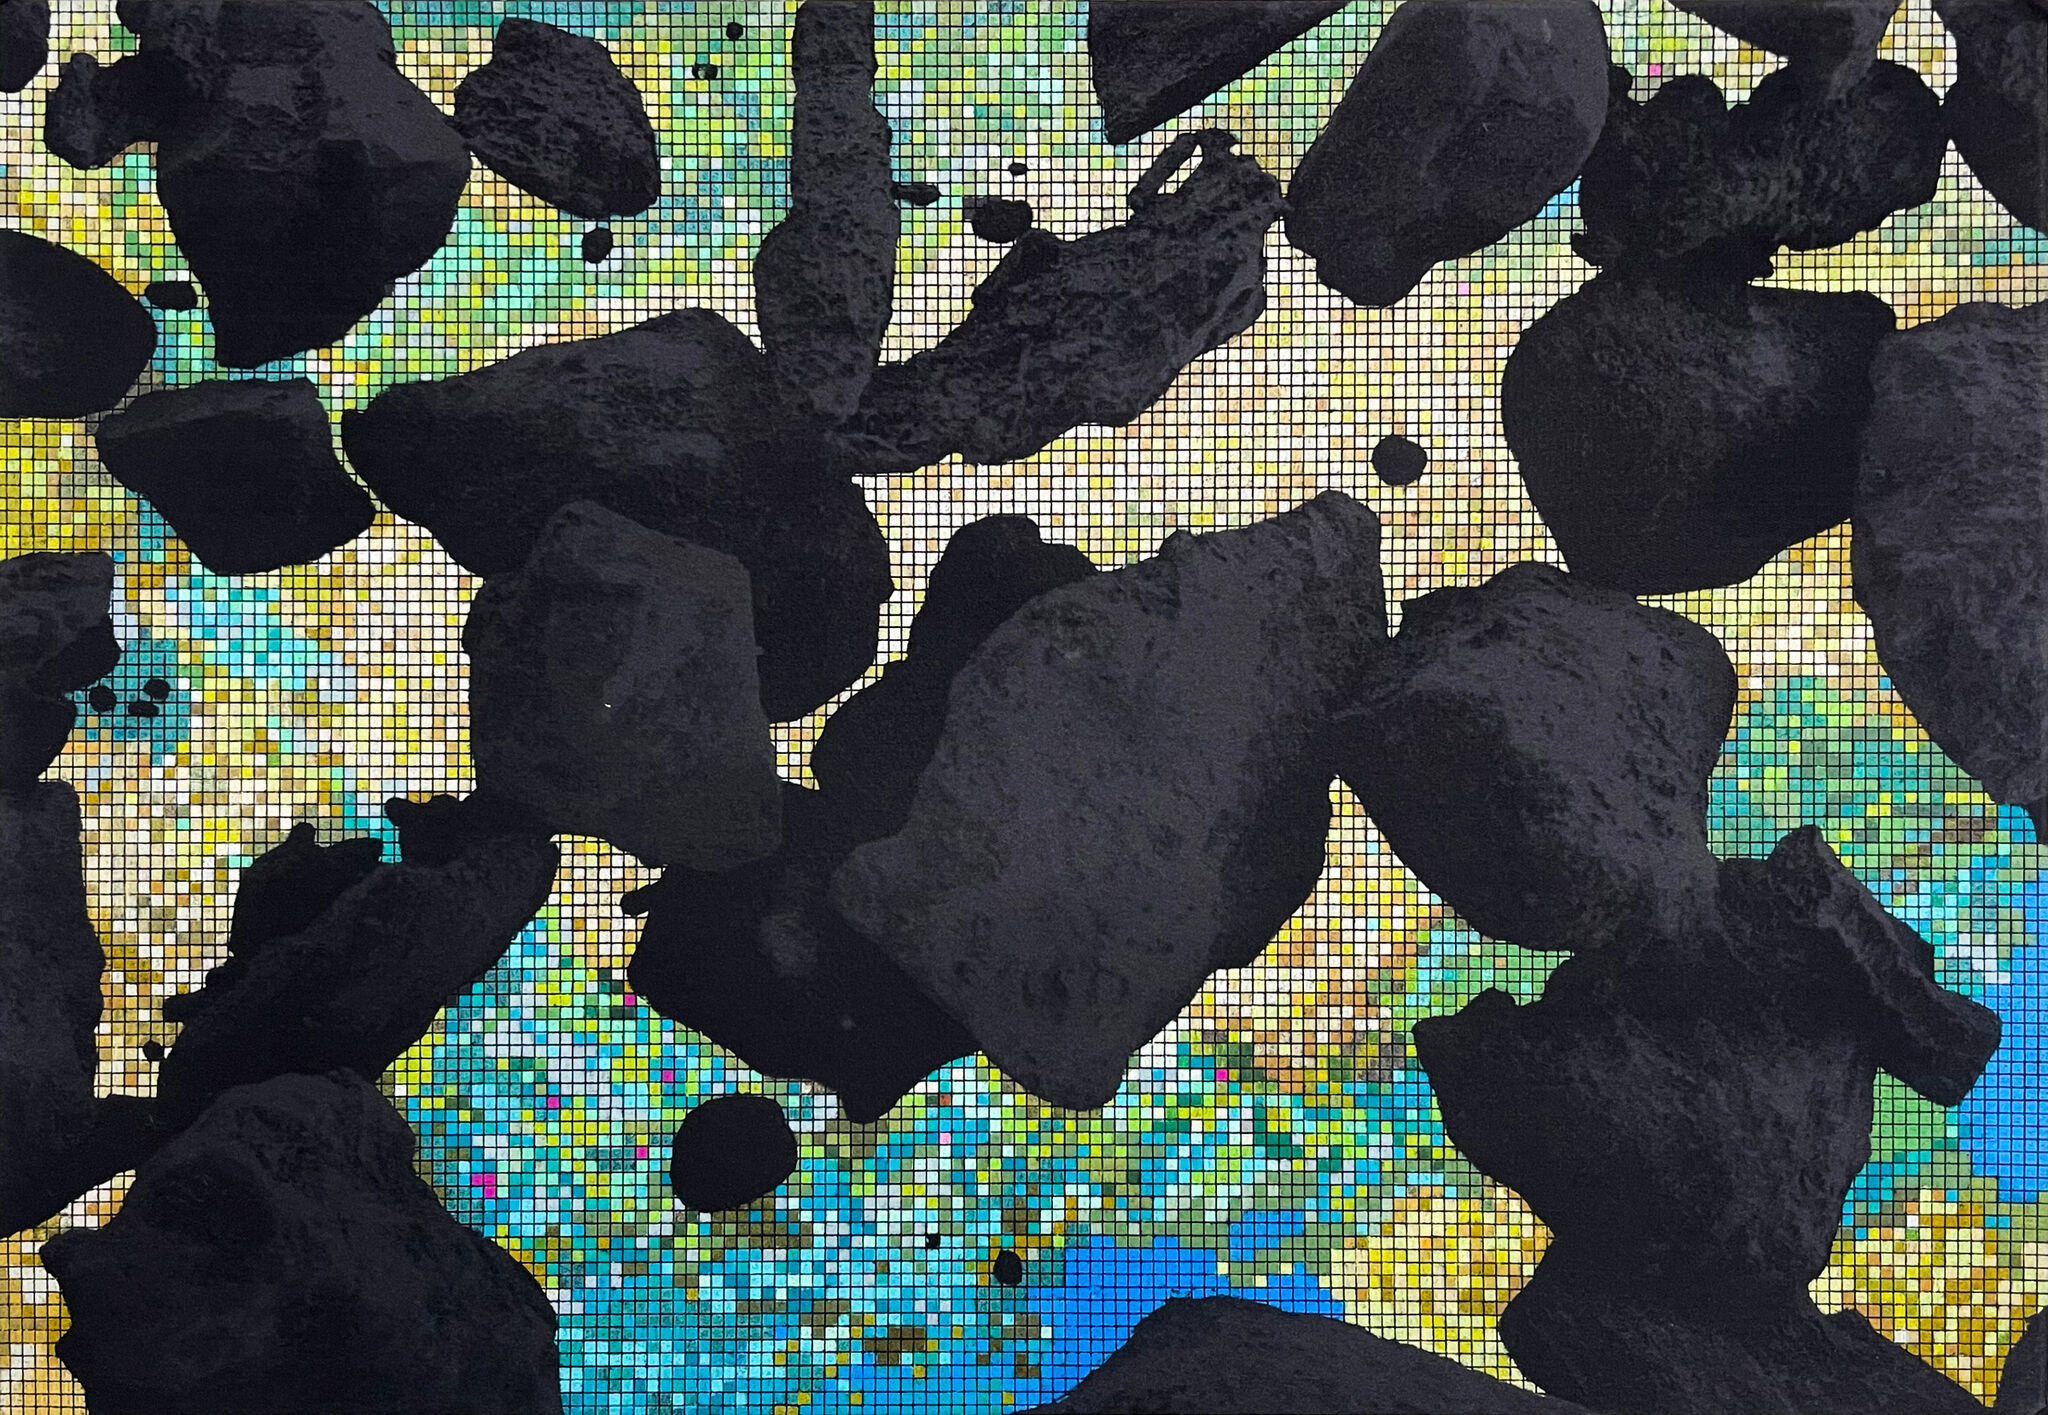 Black and gray rocks float in space with a pixelated blue and yellow graphic in the background.